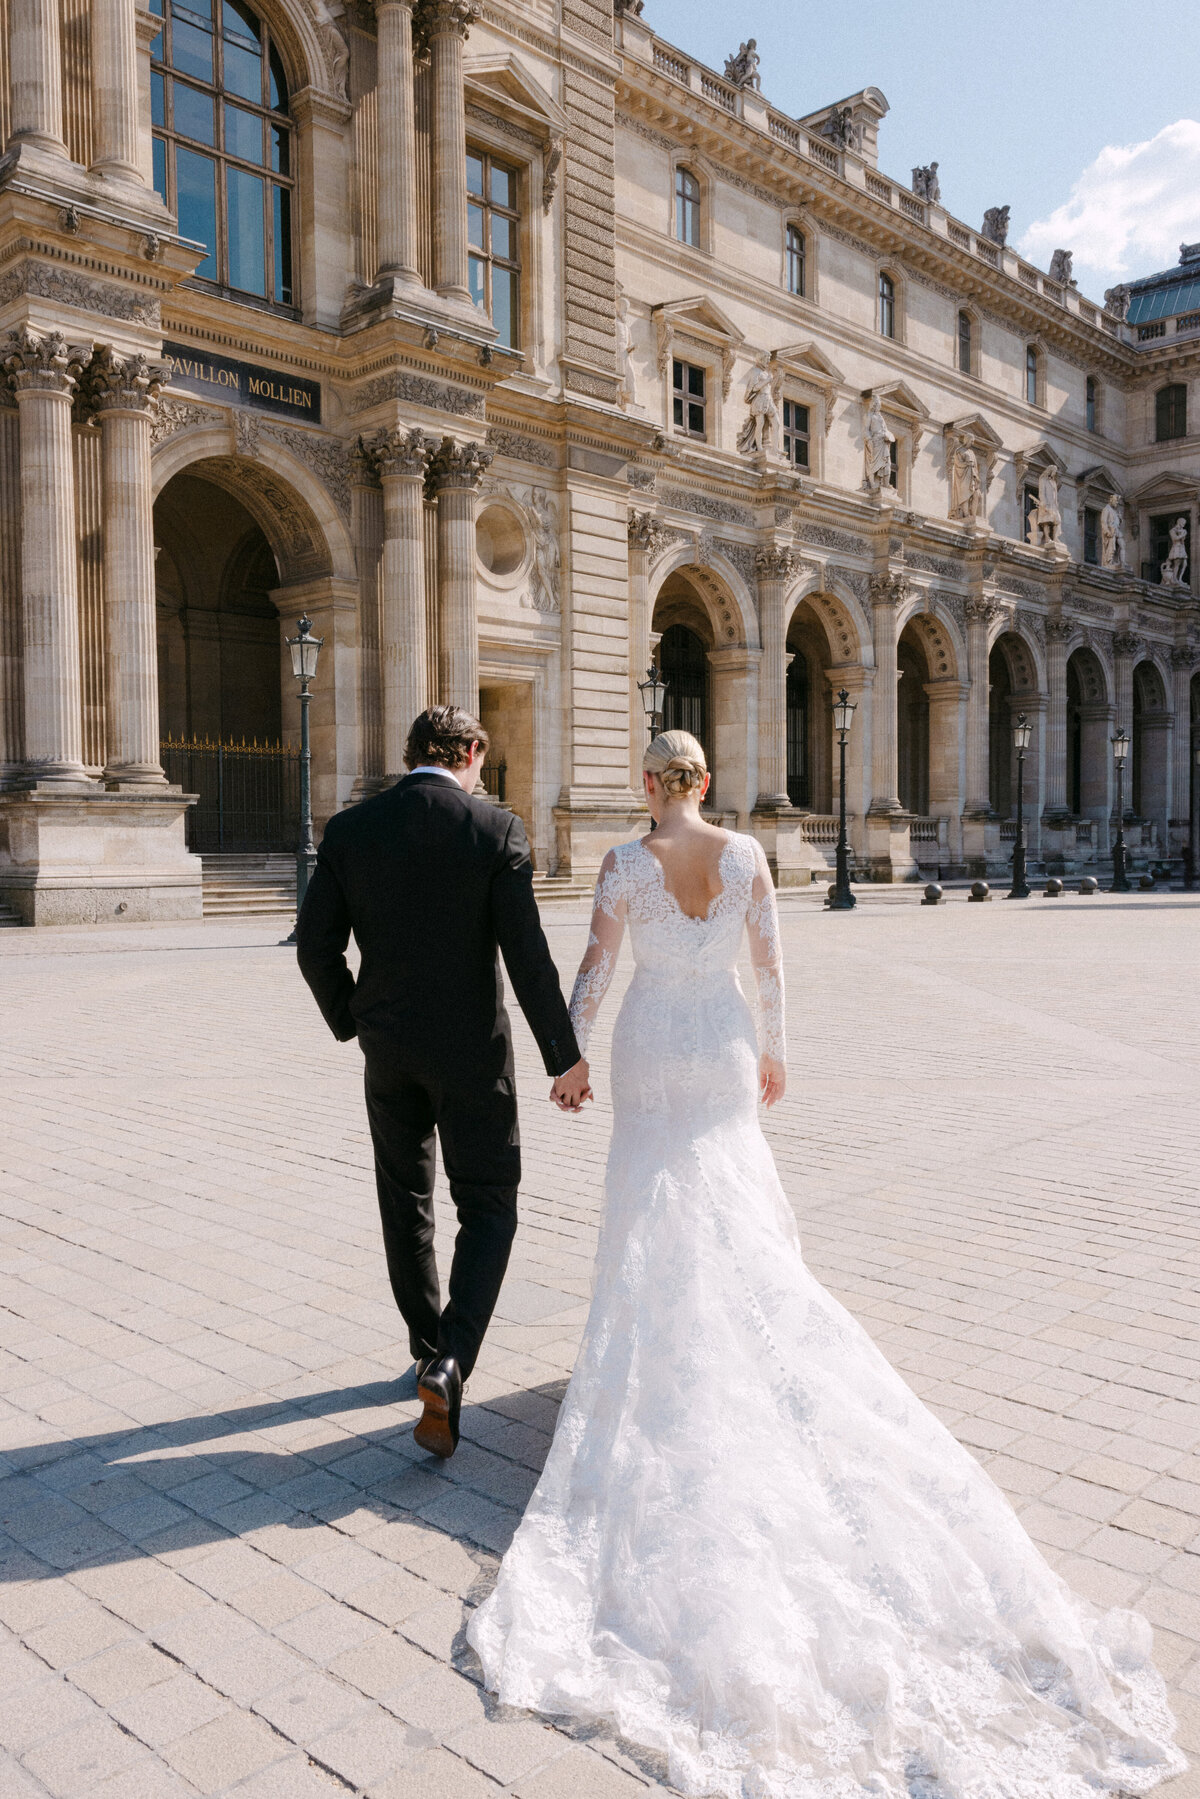 Jennifer Fox Weddings English speaking wedding planning & design agency in France crafting refined and bespoke weddings and celebrations Provence, Paris and destination wd225